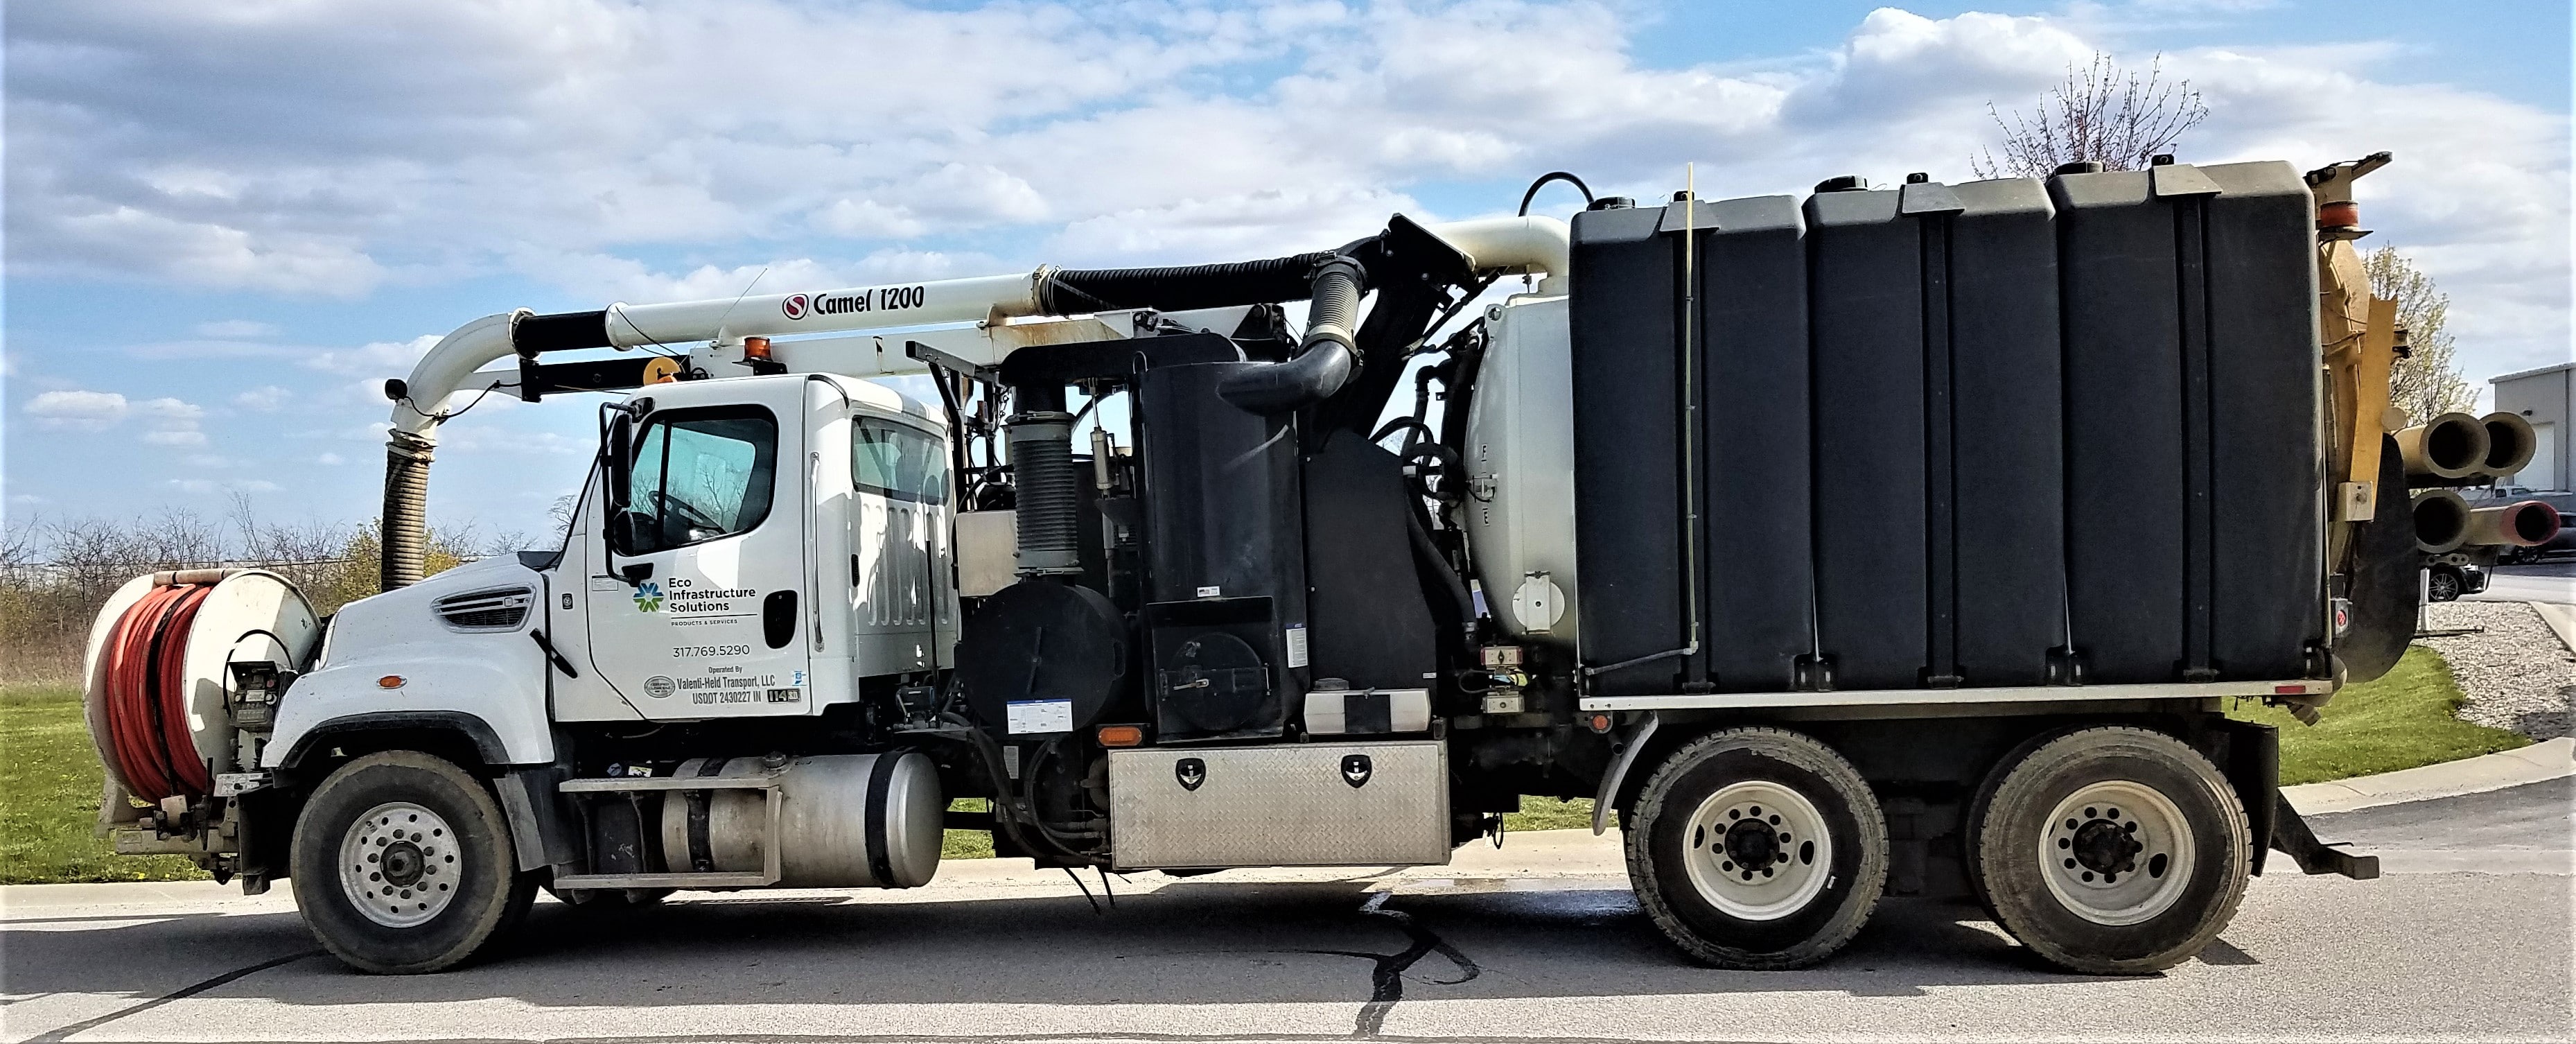 Used 2016 Freightliner Camel 1200 Combination Sewer Cleaner Stock# 606 For Sale